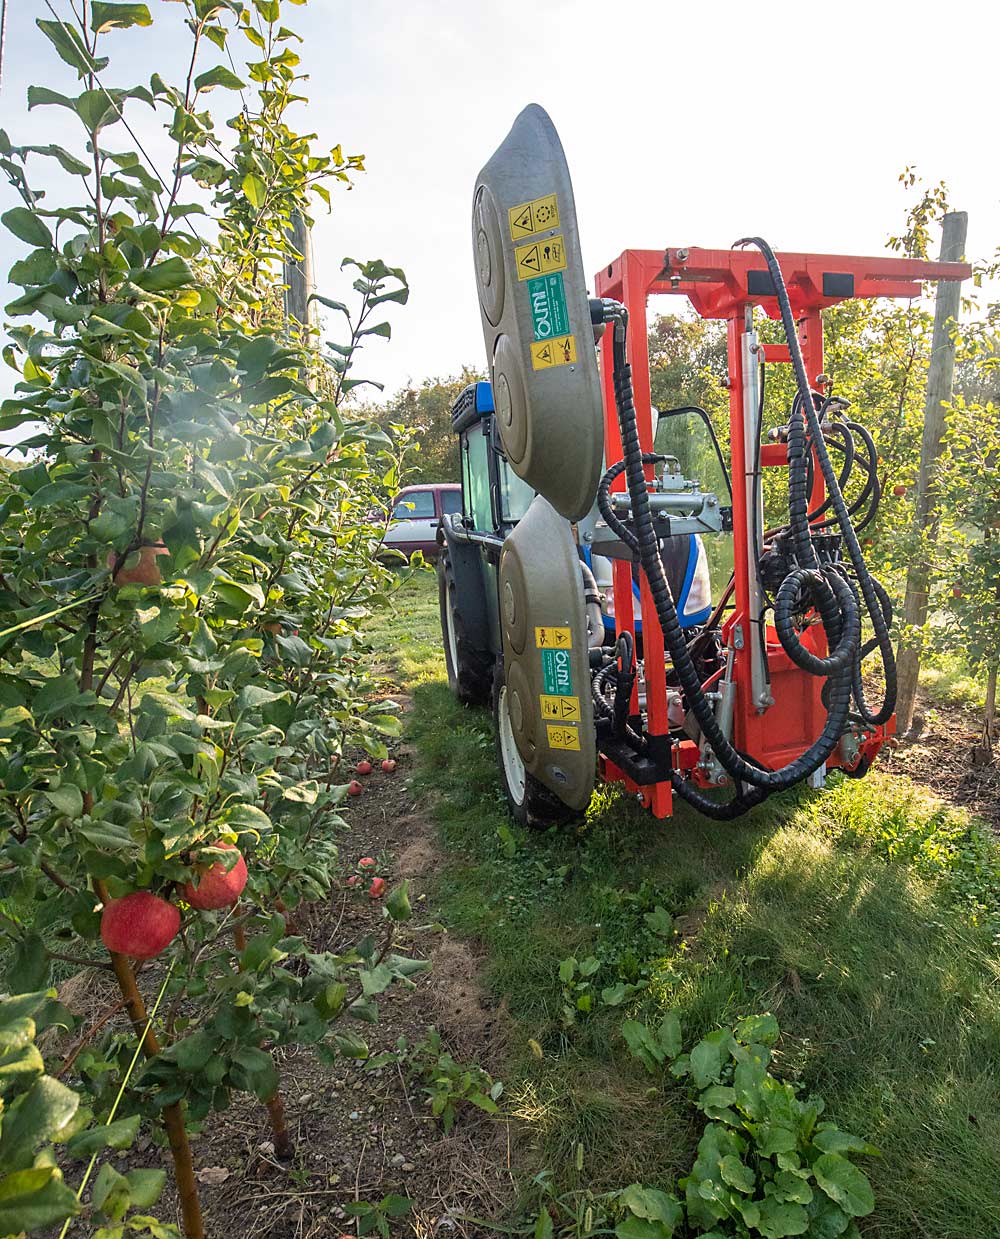 The Slaybaughs use an Olmi pneumatic defoliator to strip leaves and expose Honeycrisp to sunlight in September for better coloring. David said the machine’s dual heads cut a big swath down the row. (TJ Mullinax/Good Fruit Grower)